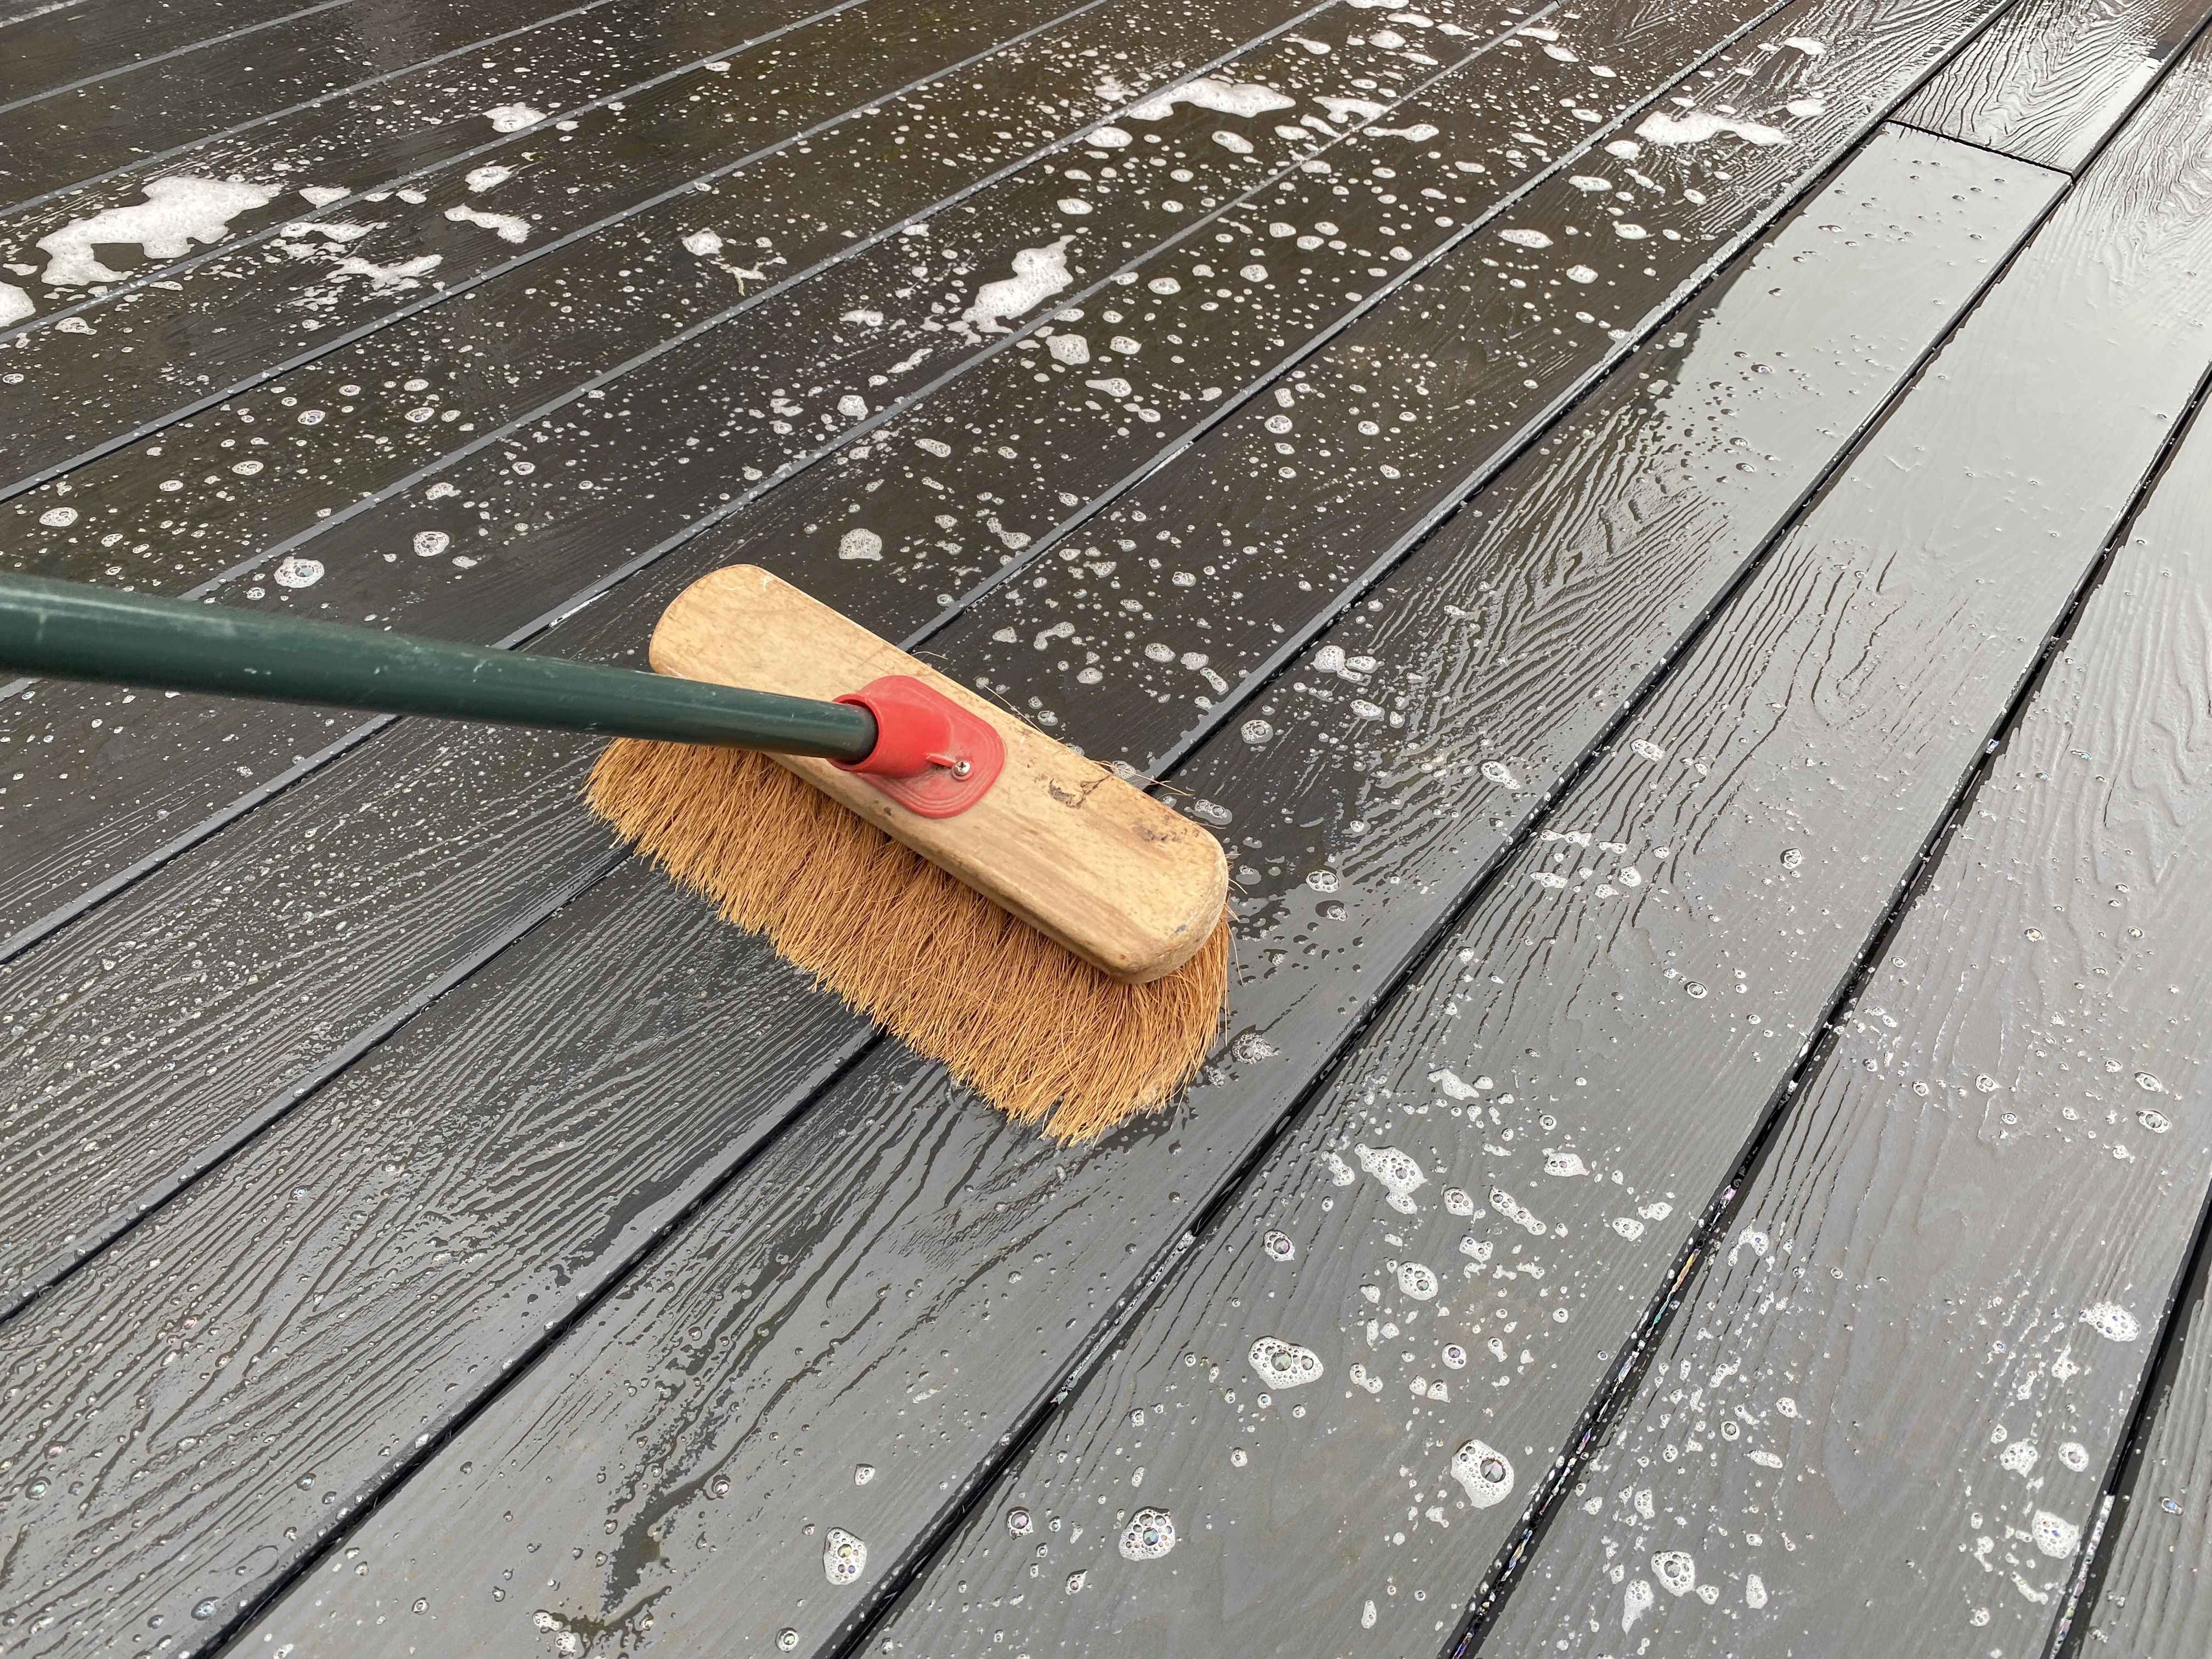 A brush being used with soap and water to scrub down some composite decking to clean it.